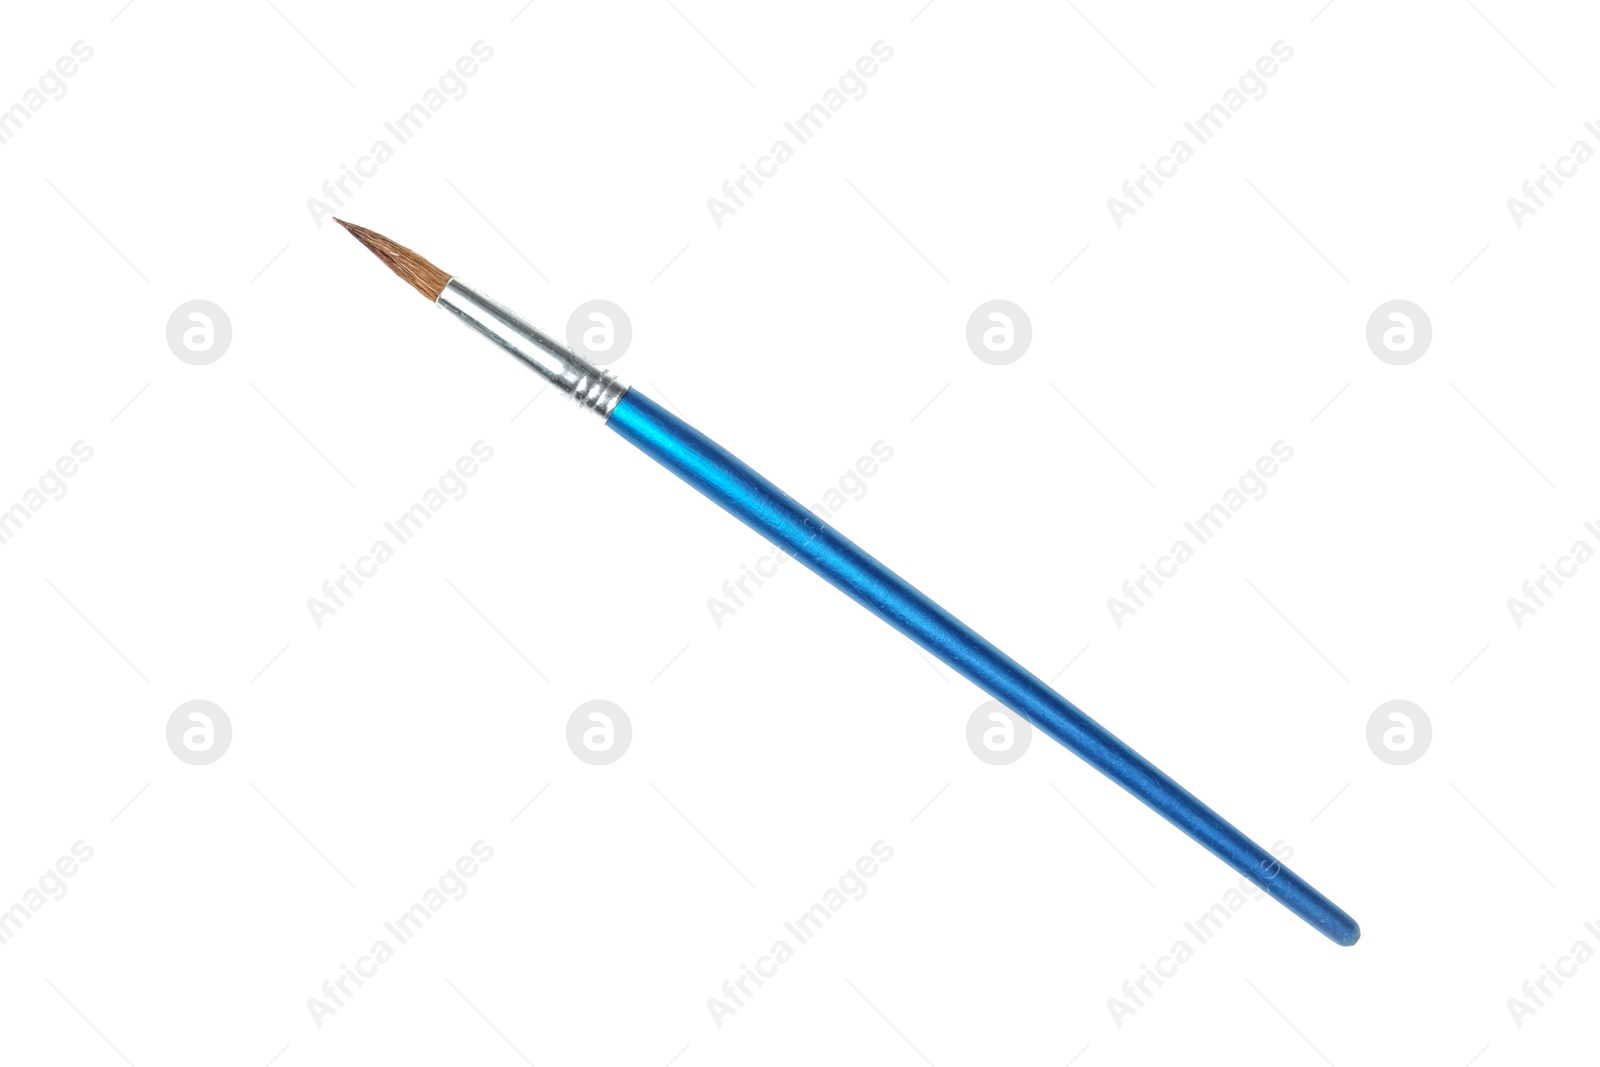 Photo of New brush for painting on white background